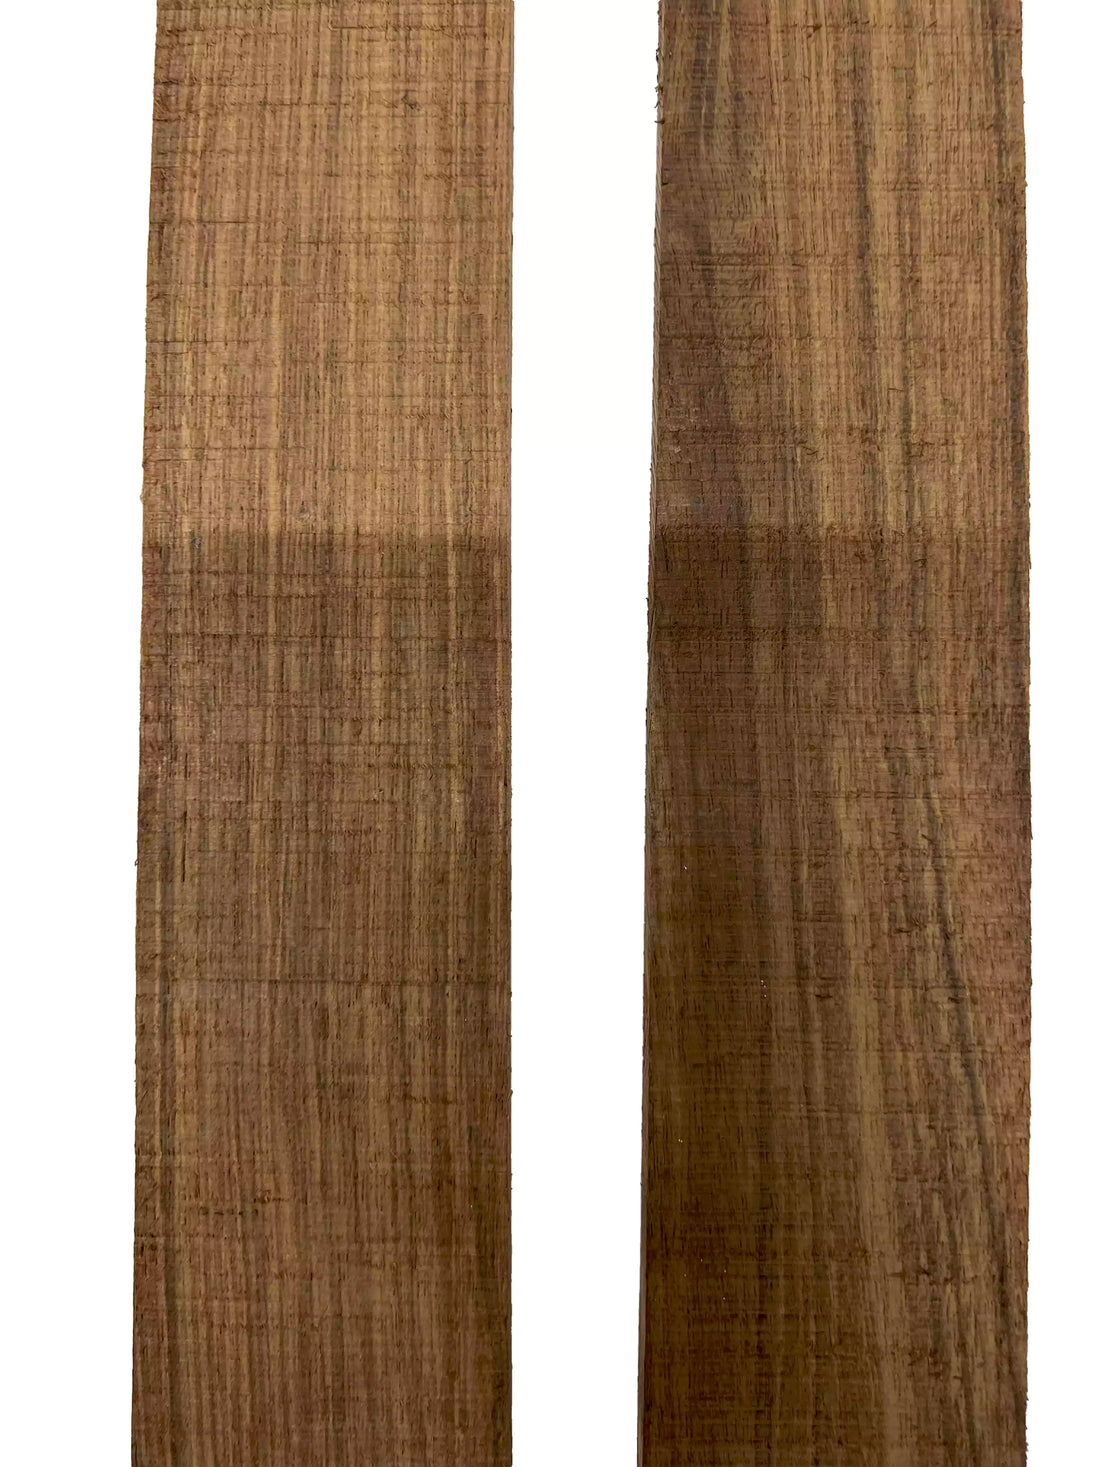 Pack of 2, Laurel Guitar Tapared Fingerboard Blanks Luthier Tonewood 21&quot; x 2-1/2&quot; x 3/8&quot; 